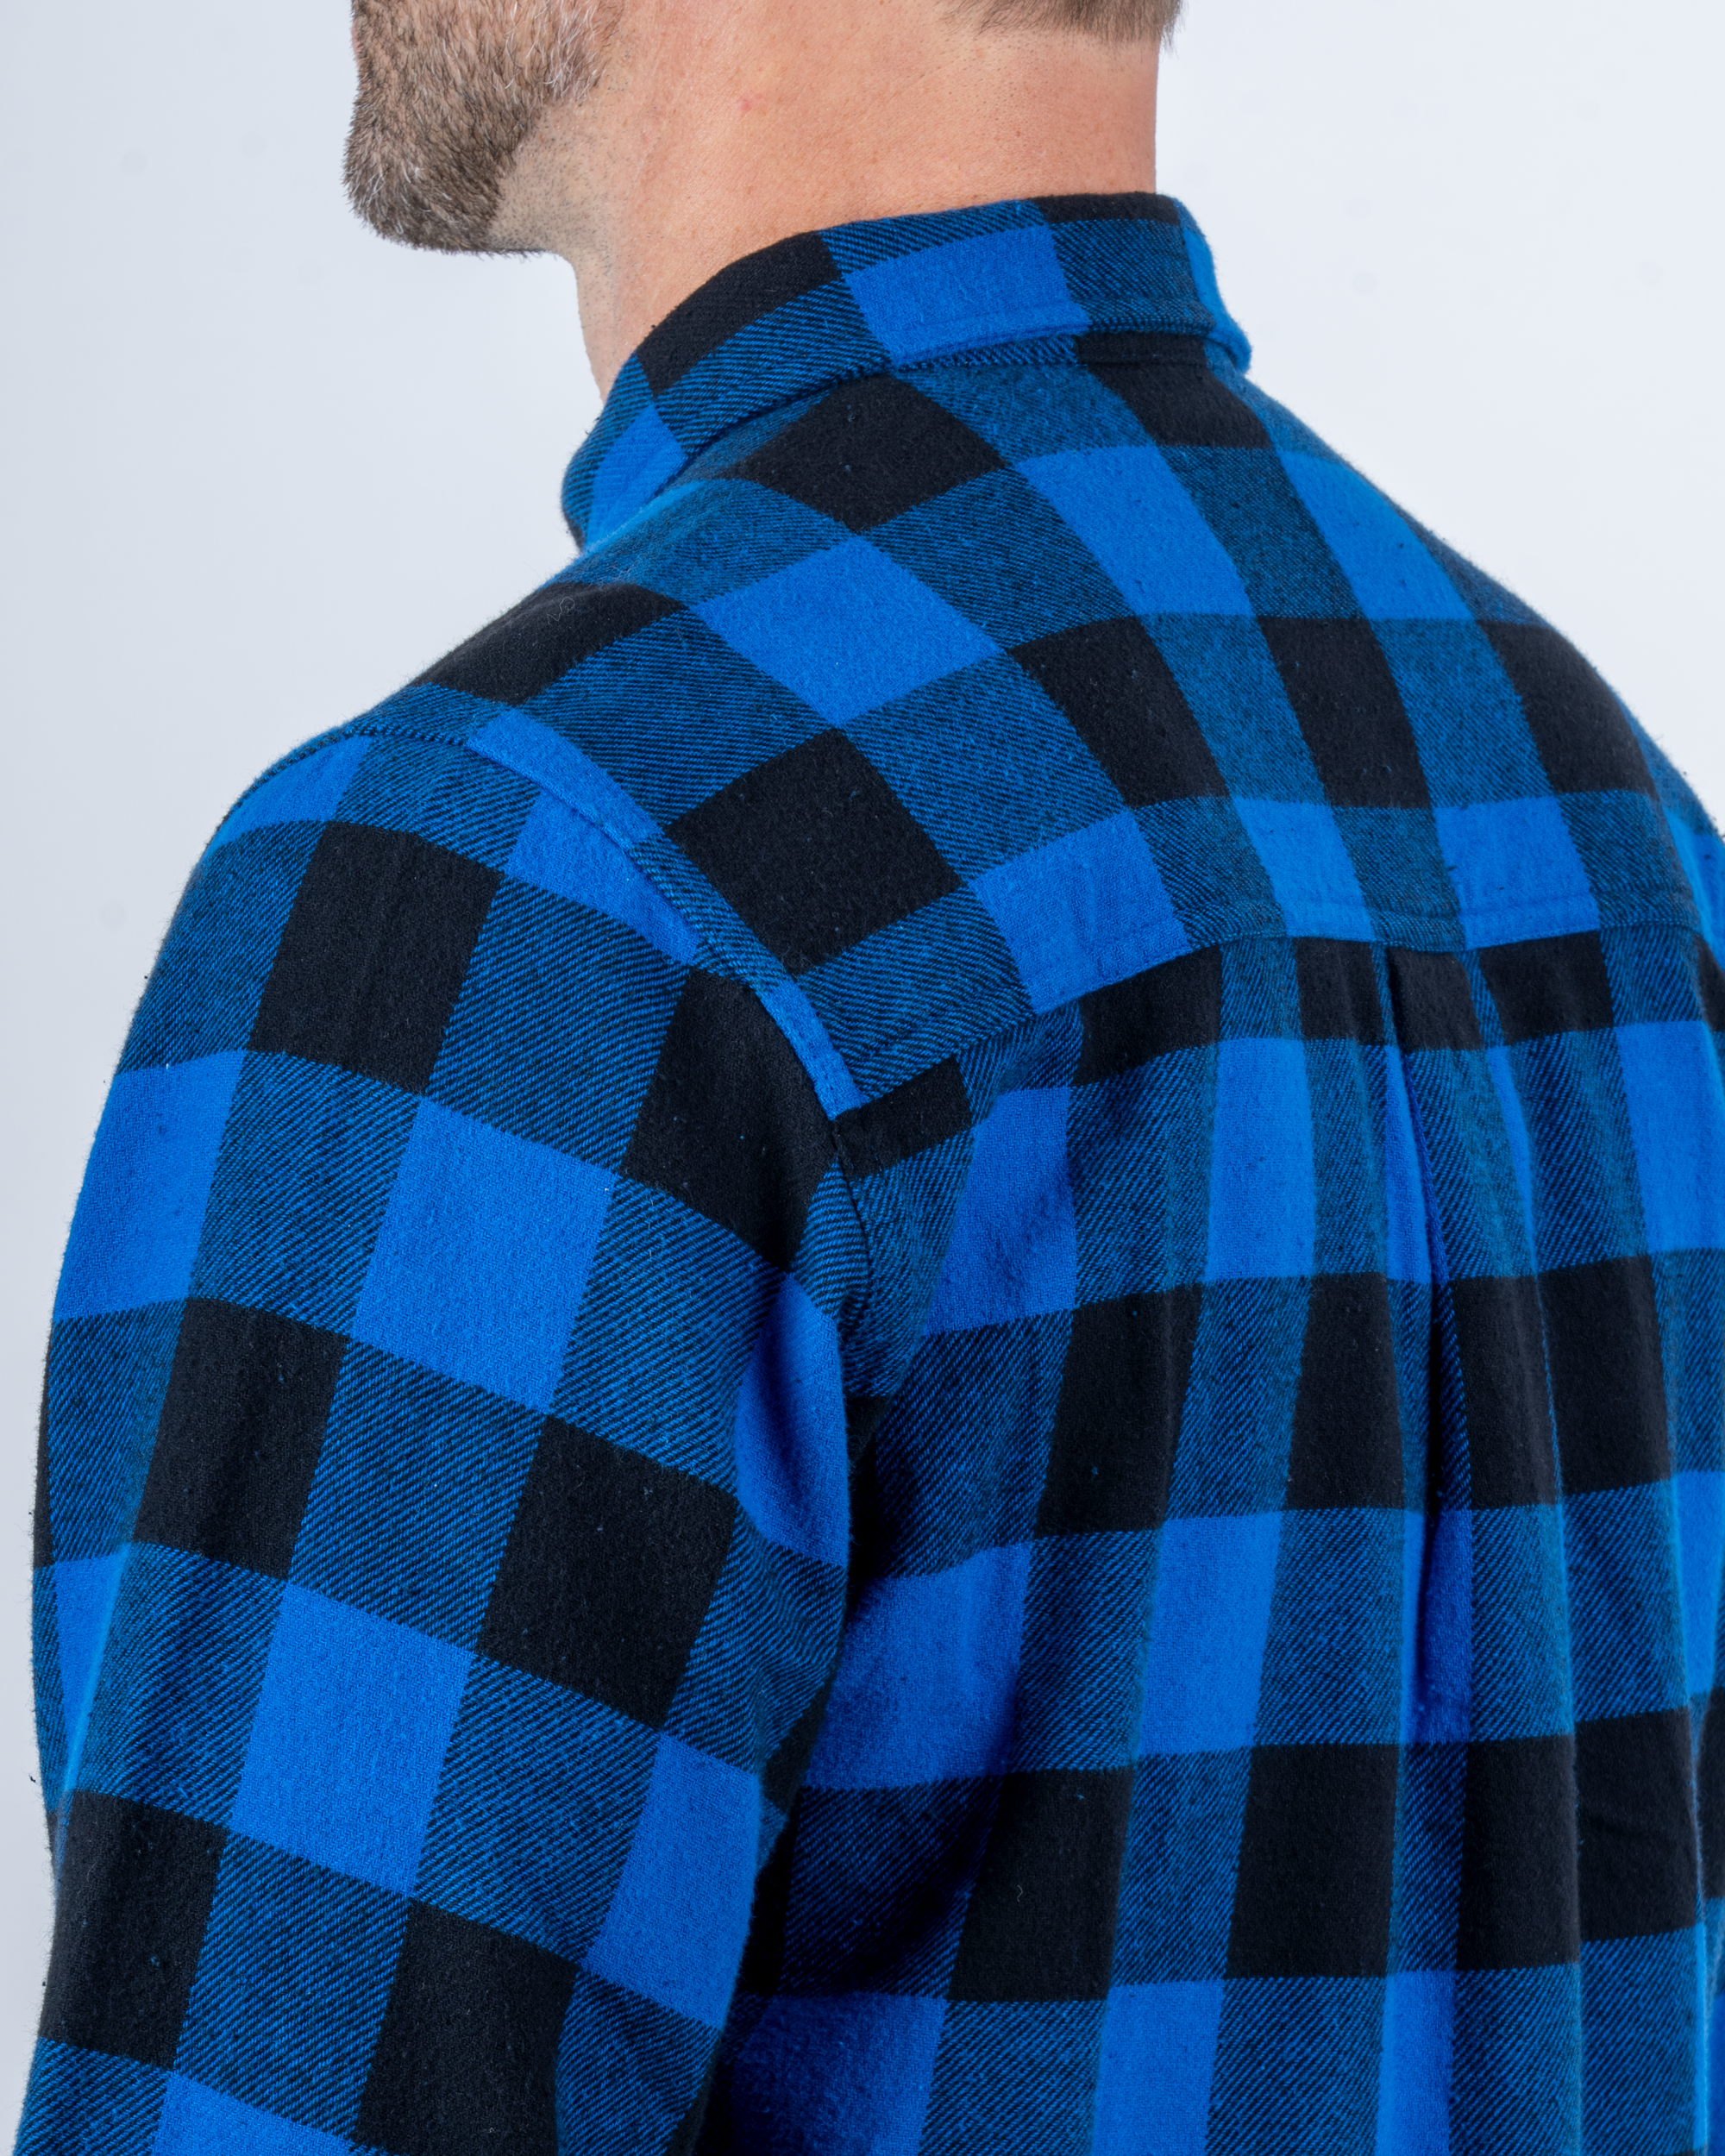 Foreign Rider Co Organic Cotton Blue Flannel Plaid 01 Long Sleeve Button Up Shirt Back Shoulder and Collar Detail